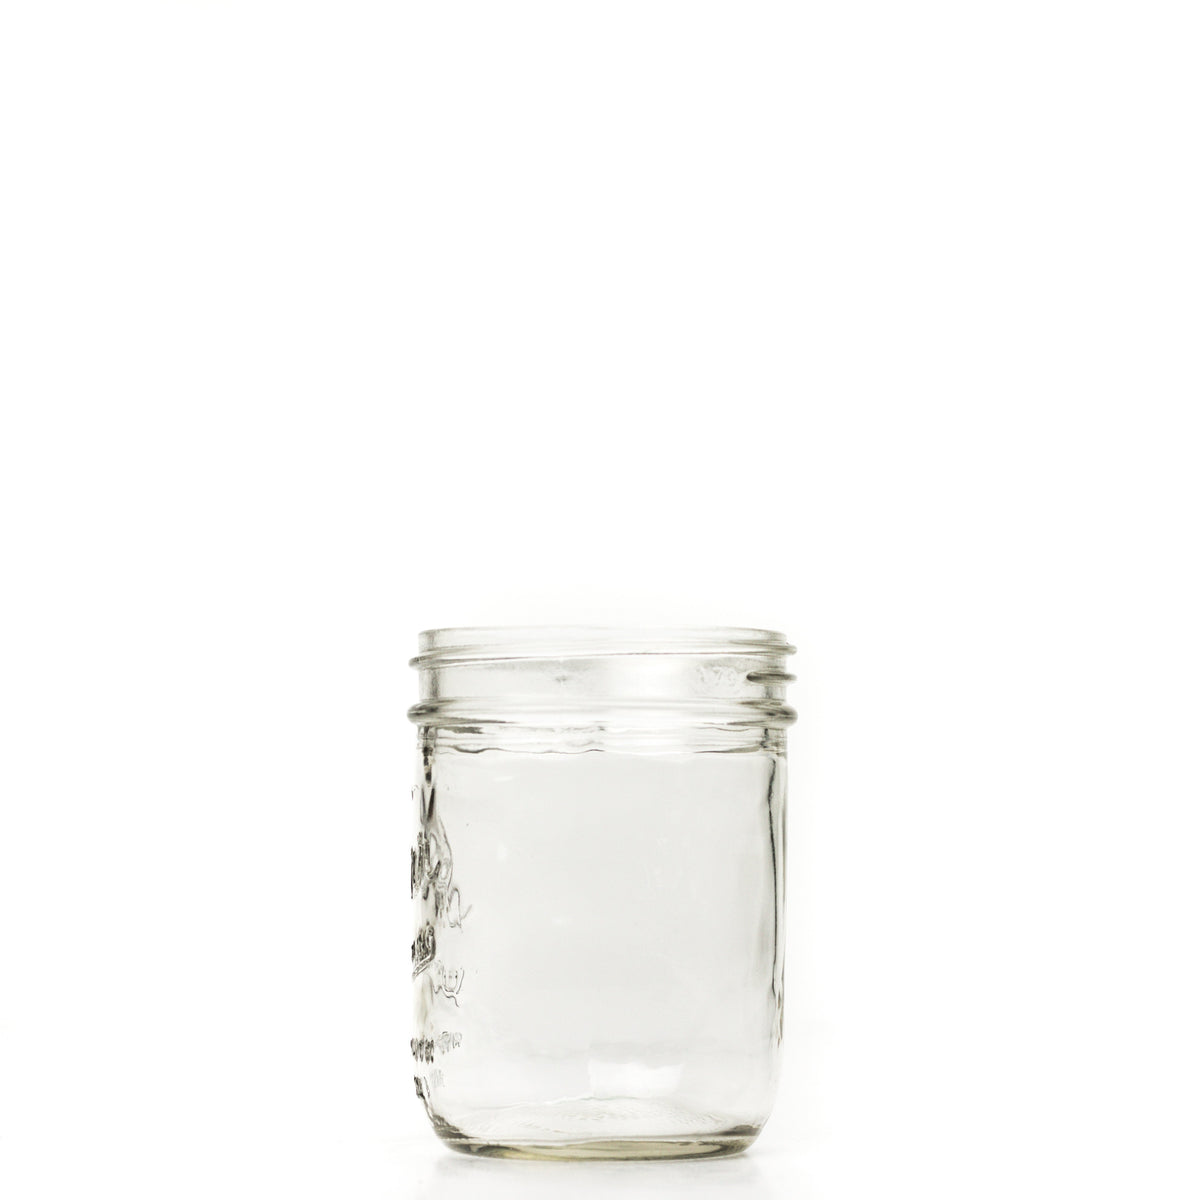 Wide mouth pint mason jar side view against a white background